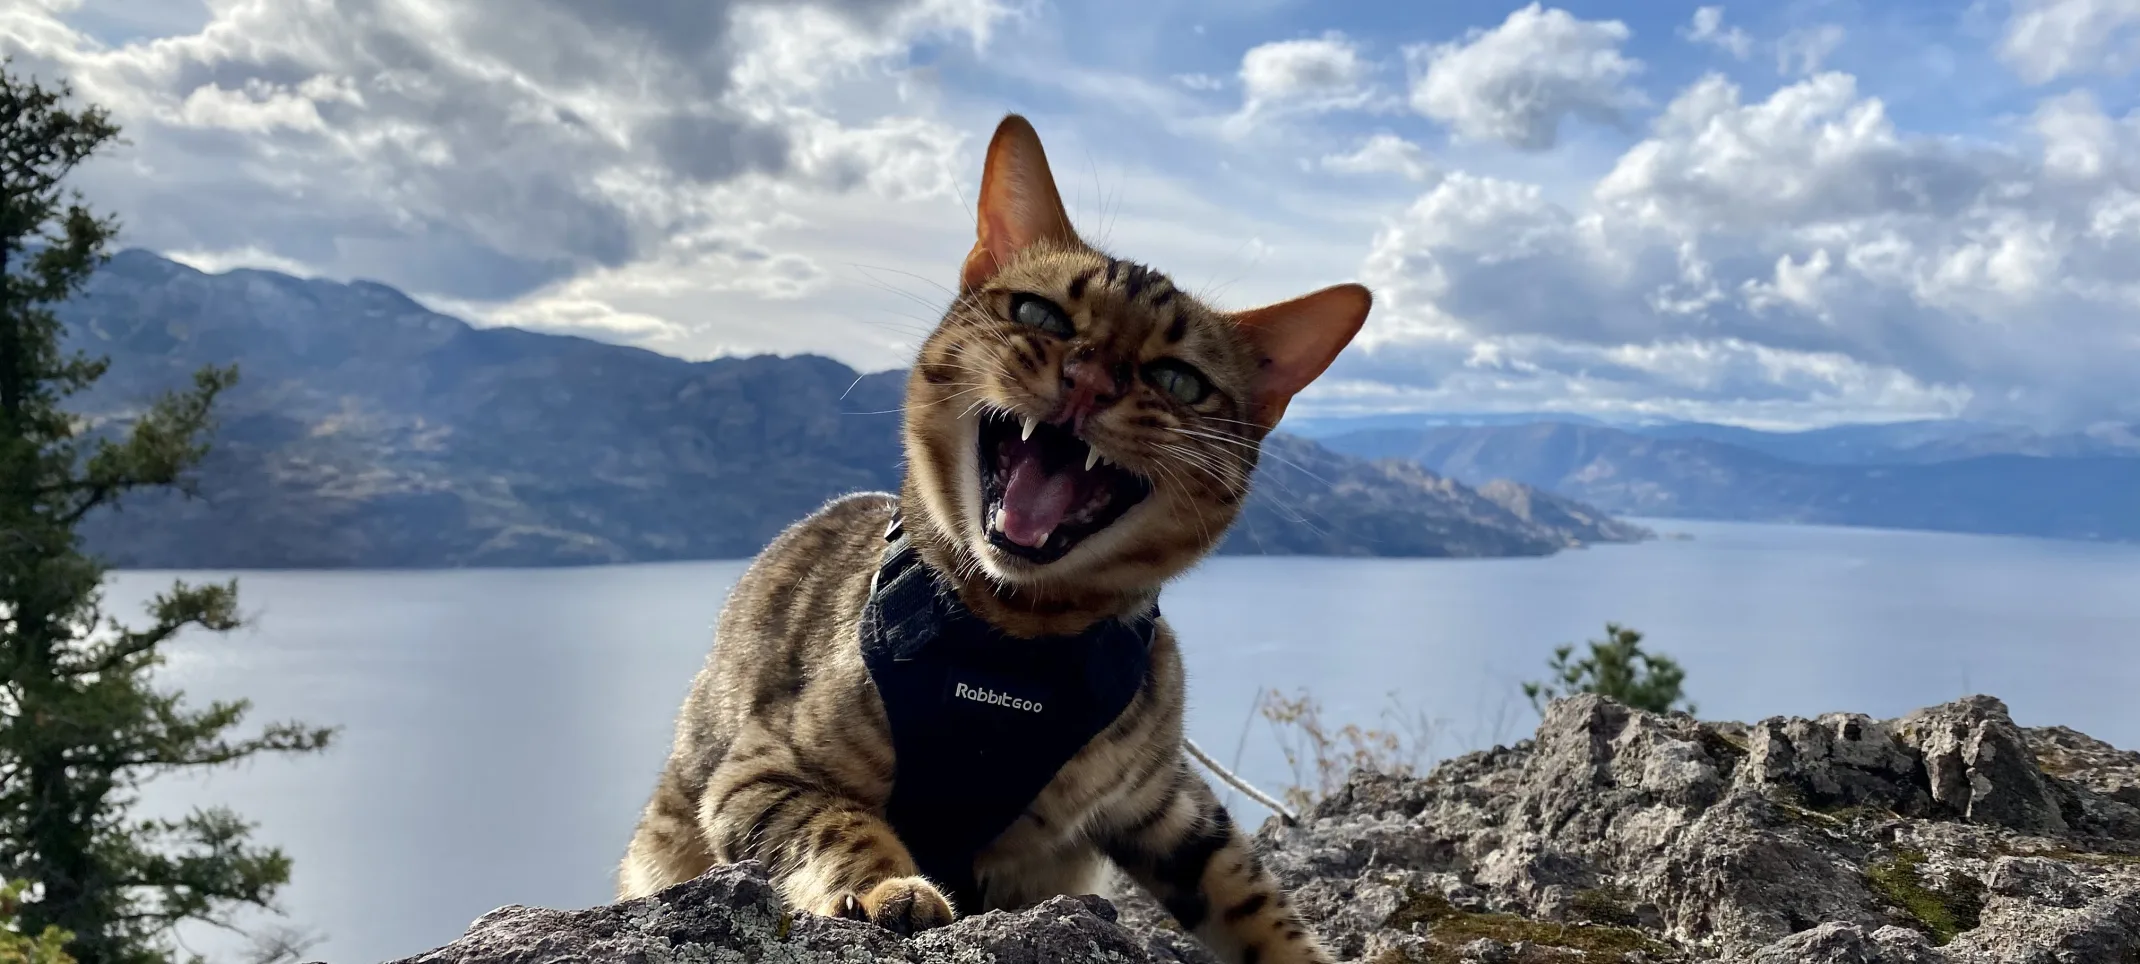 A cat on a mountain in front of a lake